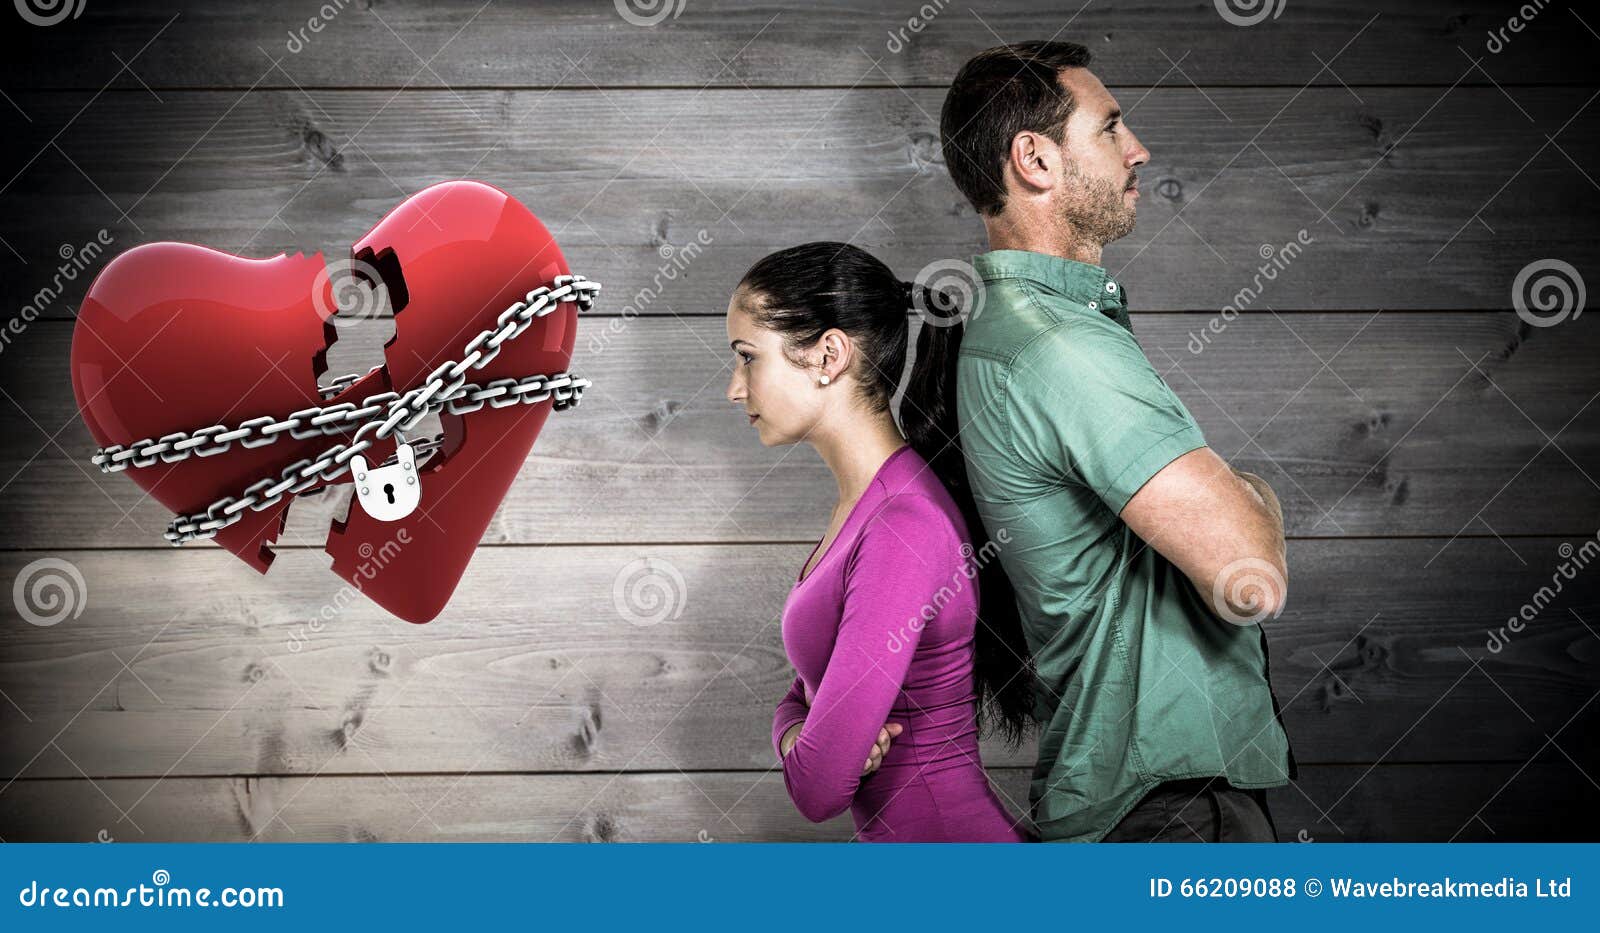 Broken Heart Key Holder Stock Photo, Picture and Royalty Free